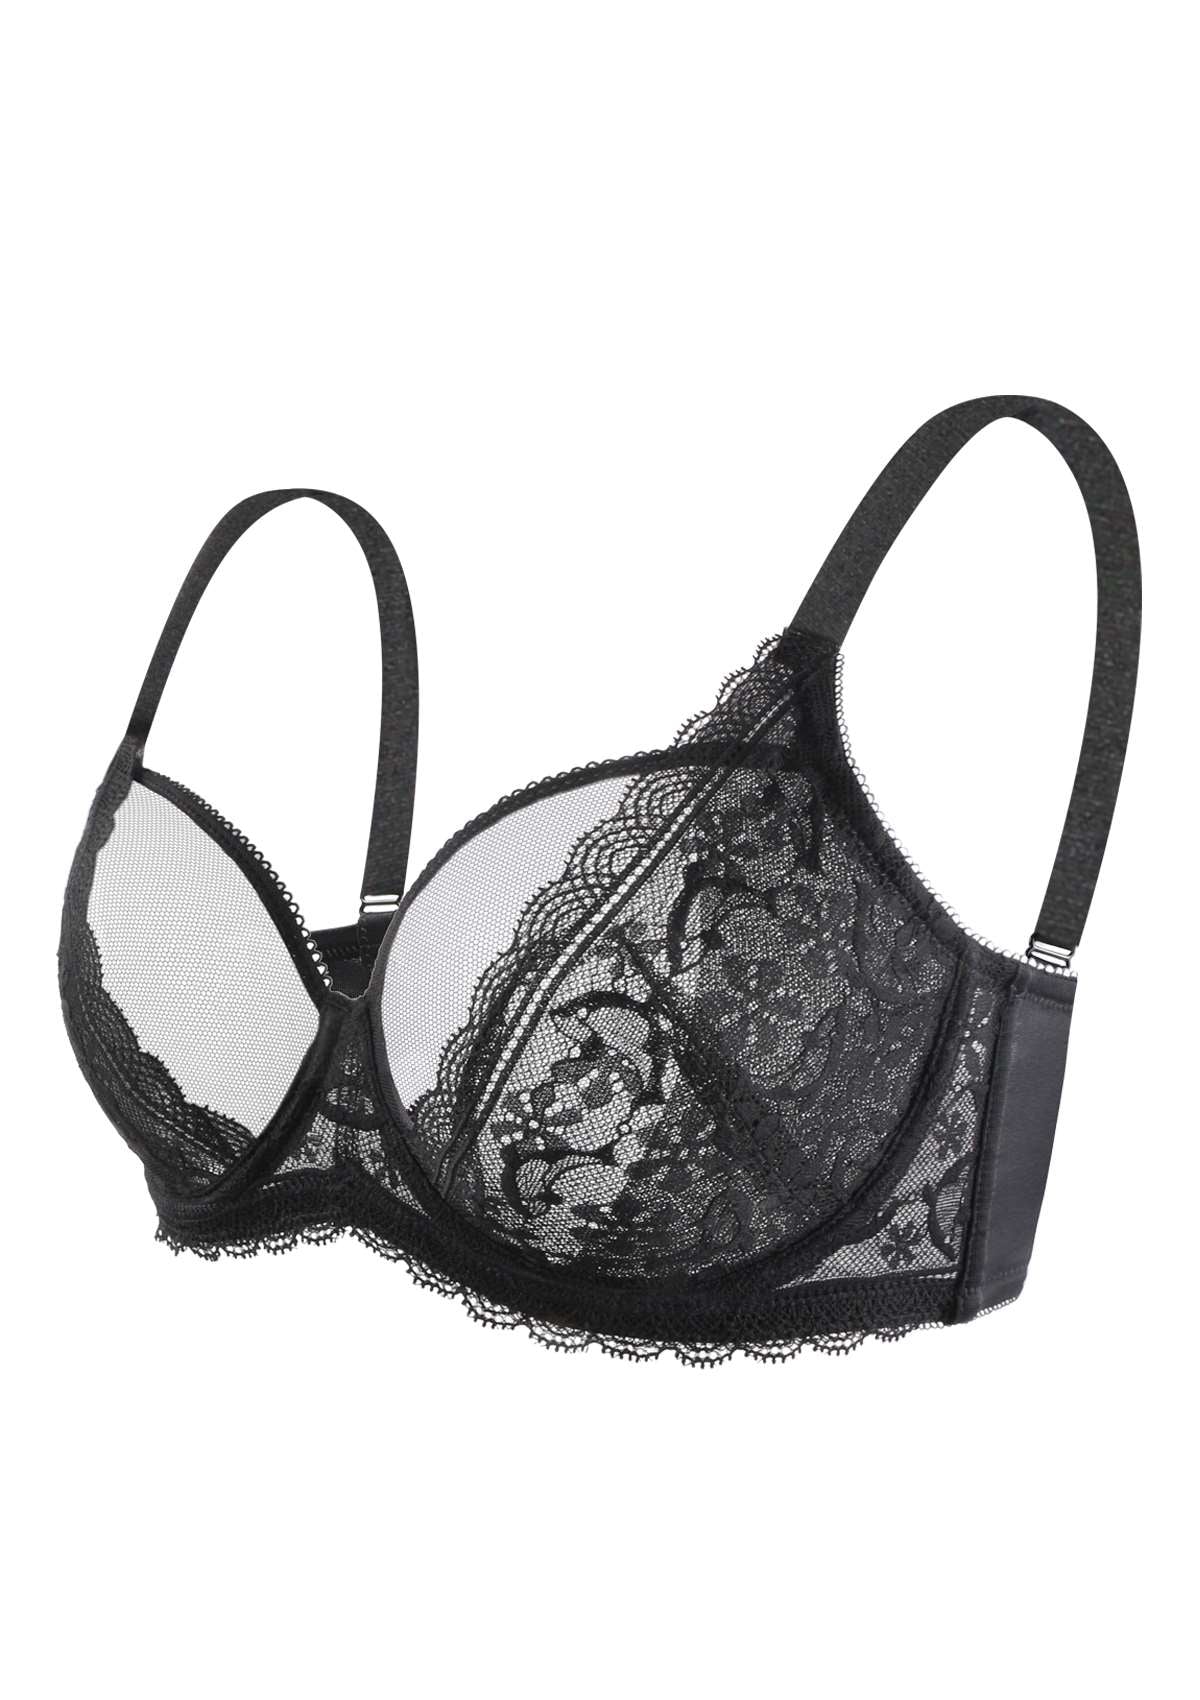 HSIA Anemone Lace Bra And Panties: Back Support Wired Bra - Black / 38 / D